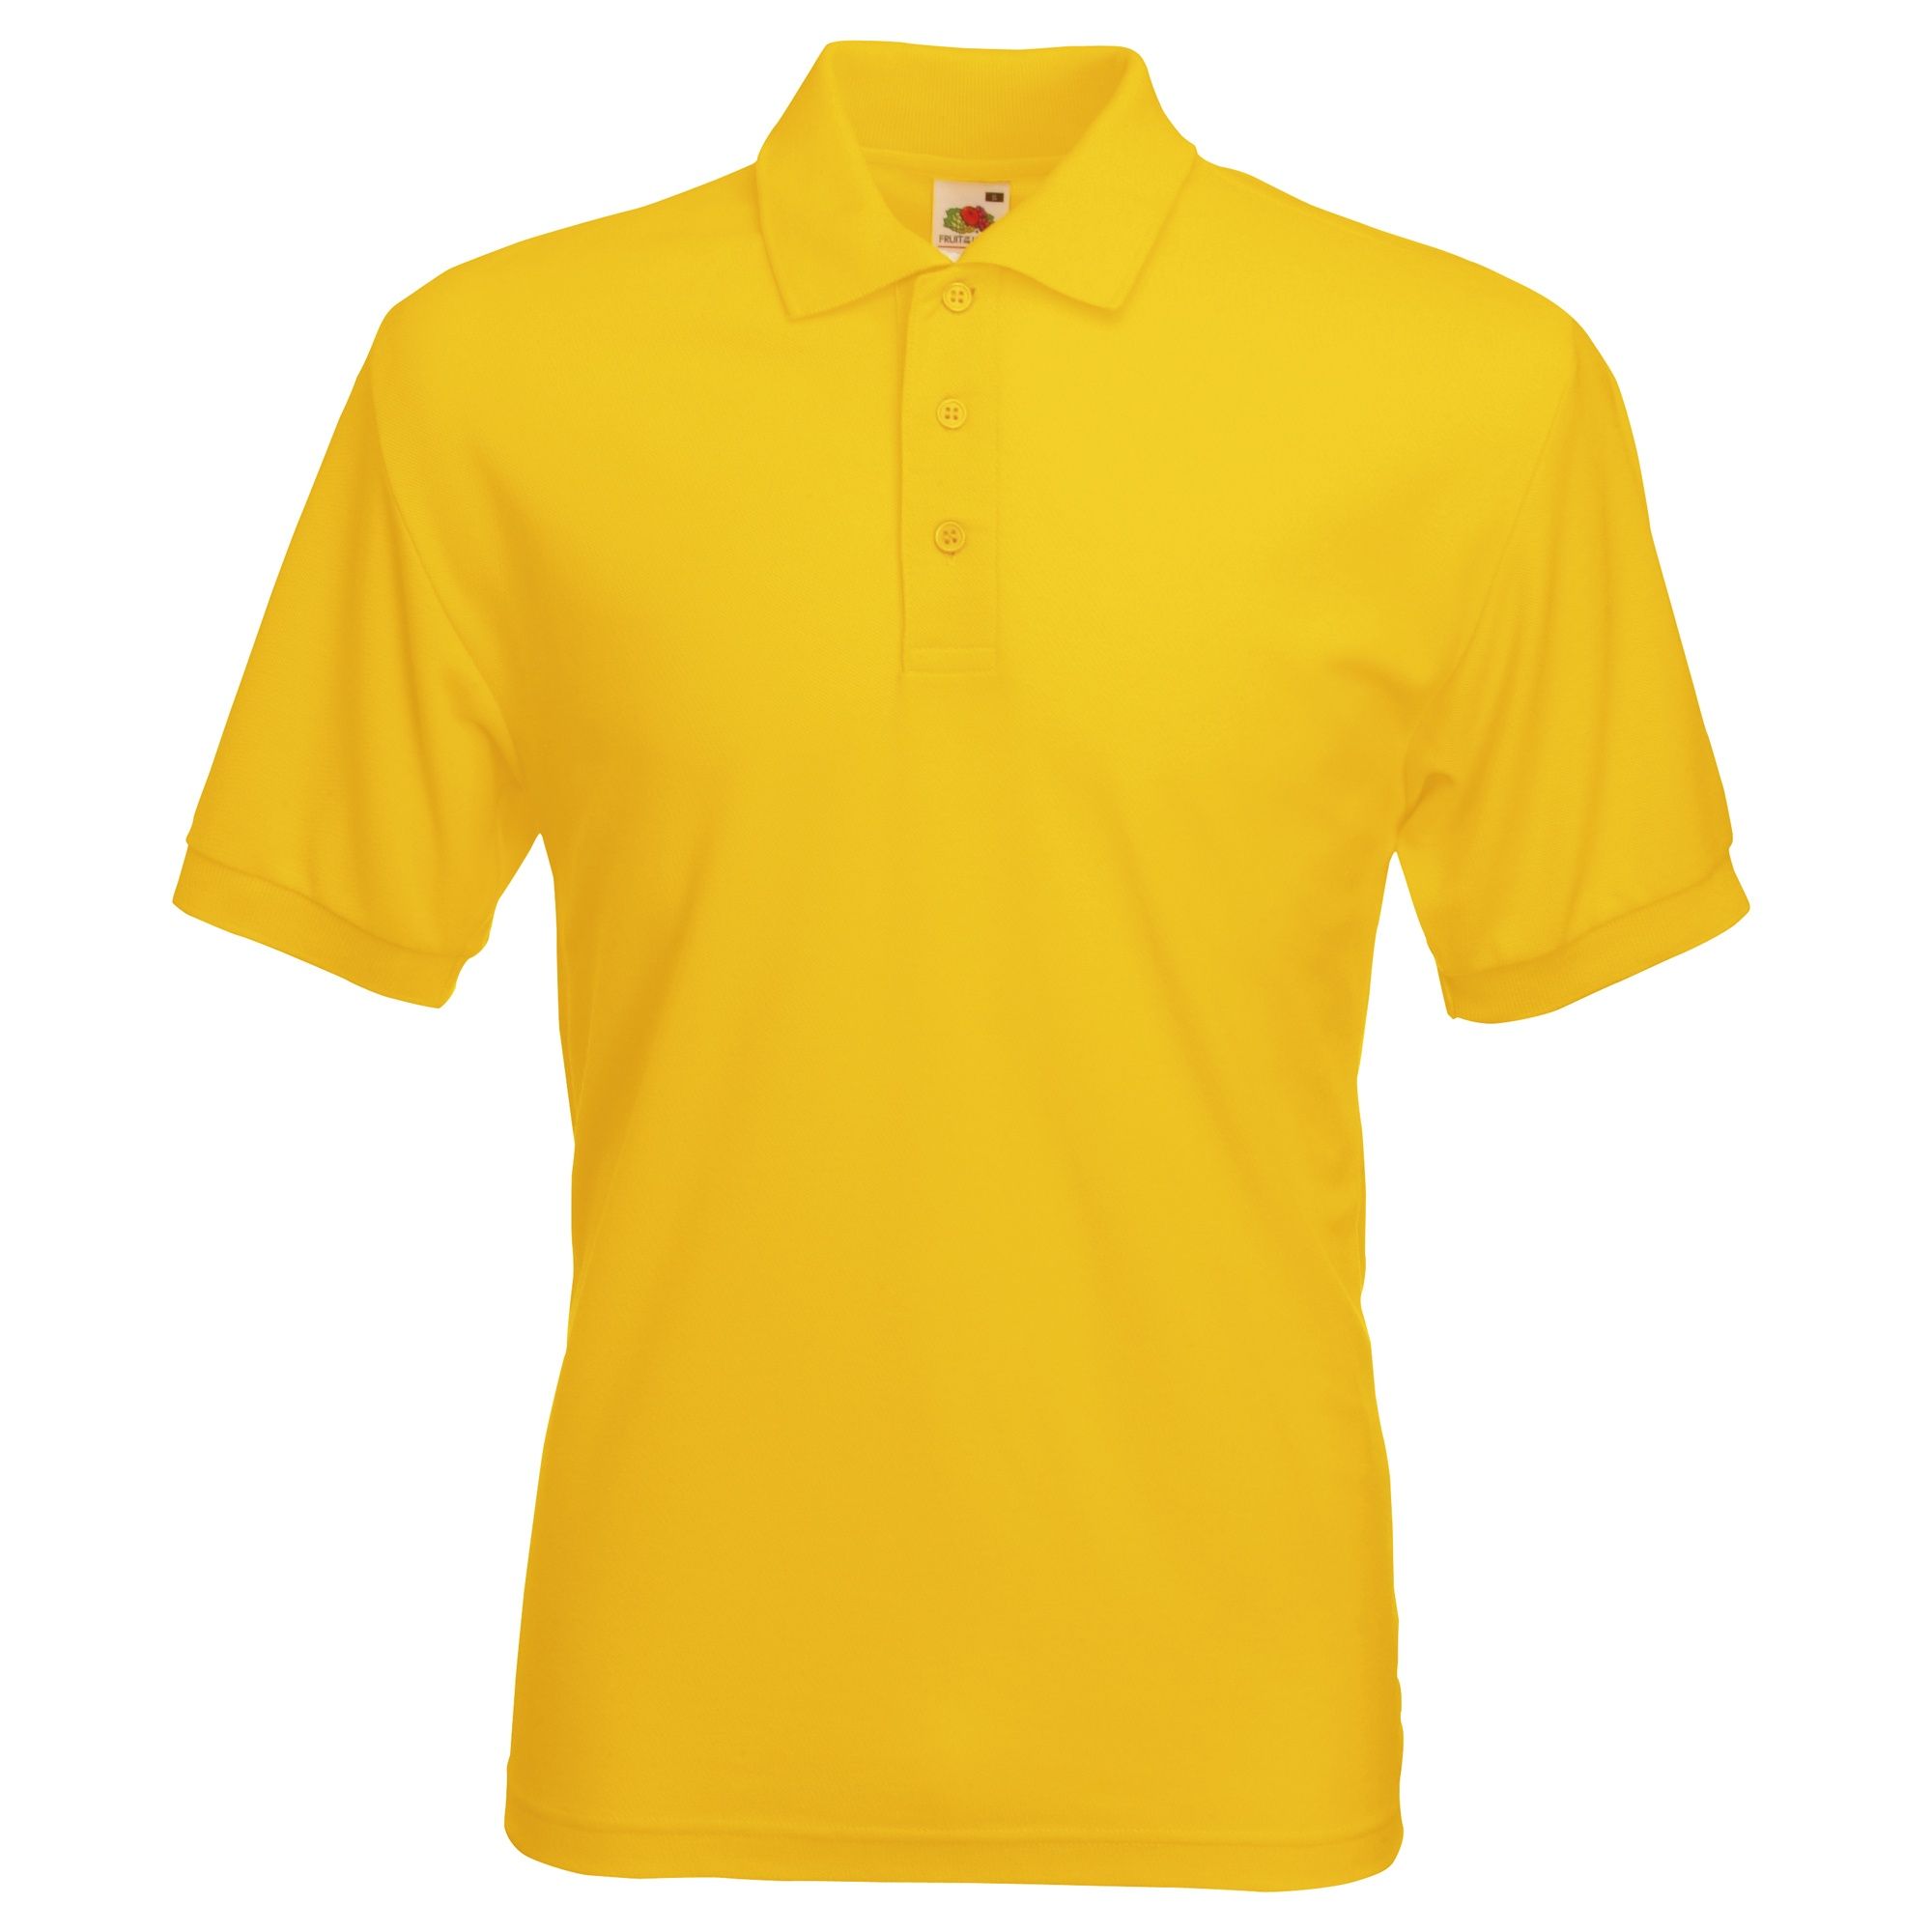 Adult easy care, easy wear pique polo. Ideal for workwear. Guaranteed to perform at 60° wash. 1x1 rib flat knit collar and cuffs. Three self colour button fused placket and sewn-in spare button. Reinforced shoulder seams with single needle stitching. Taped neckline for added comfort. Also available in ladies sizes, code 63212. and childrens sizes, code 63417. *3XL available in White, Navy, Black, Heather Navy and Heather Grey only. Weight: 170-180g/m². Fabric: Easycare 65% Polyester, 35% Cotton. S (35-37: To Fit (ins)). M (38-40: To Fit (ins)). L (41-43: To Fit (ins)). XL (44-46: To Fit (ins)). 2XL (47-49: To Fit (ins)). 3XL (50-52: To Fit (ins)). <BR><BR>FRUIT OF THE LOOM - a brand steeped in tradition, offering a comprehensive range of garments.